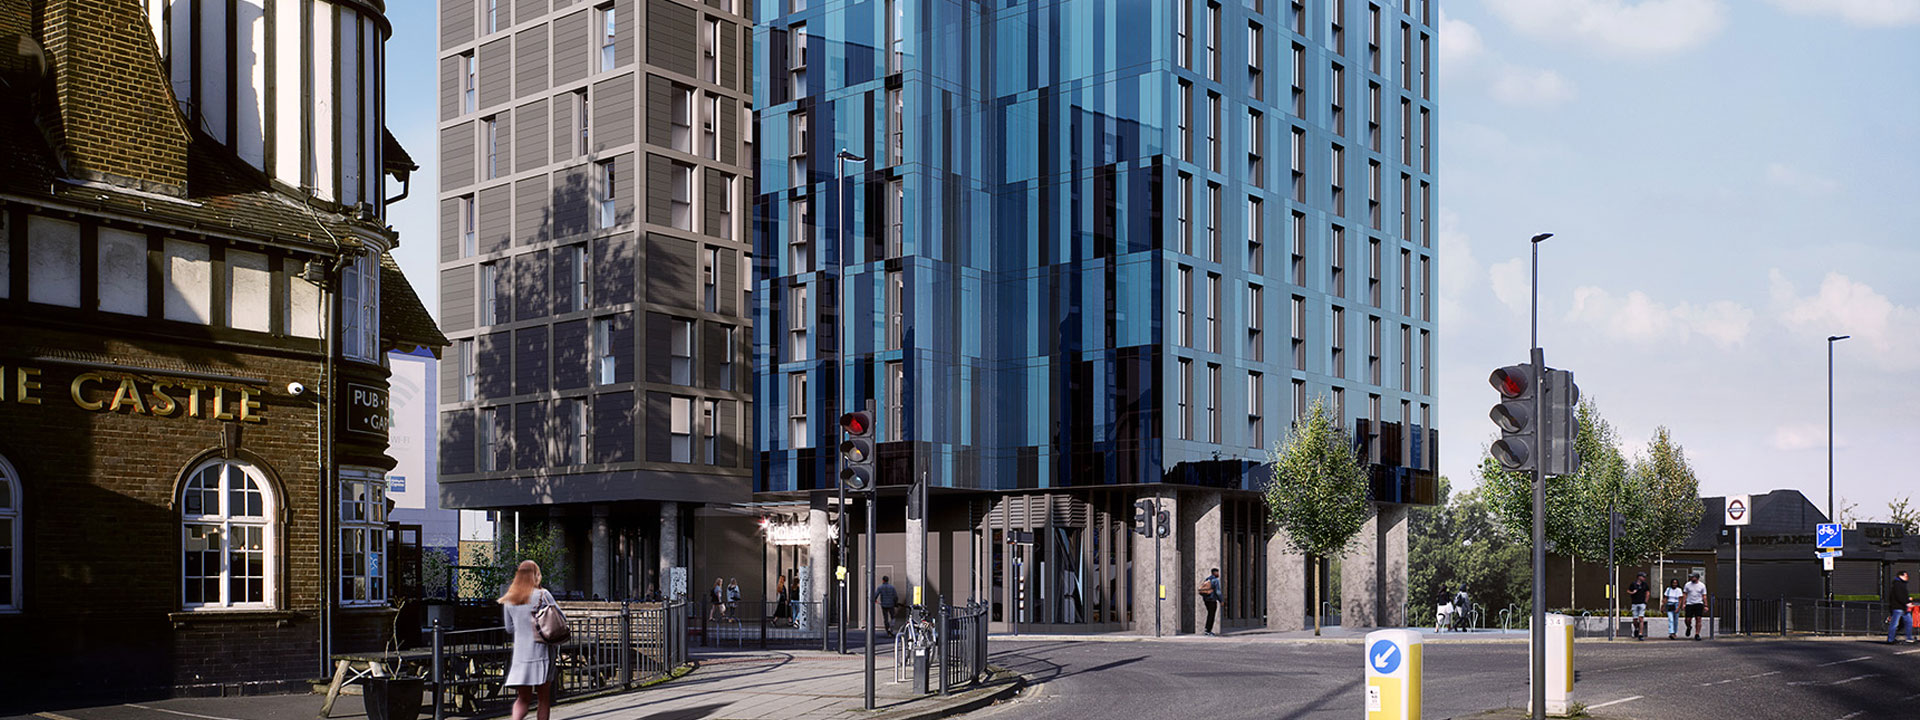 Space saving cycle storage for new student accommodation in London